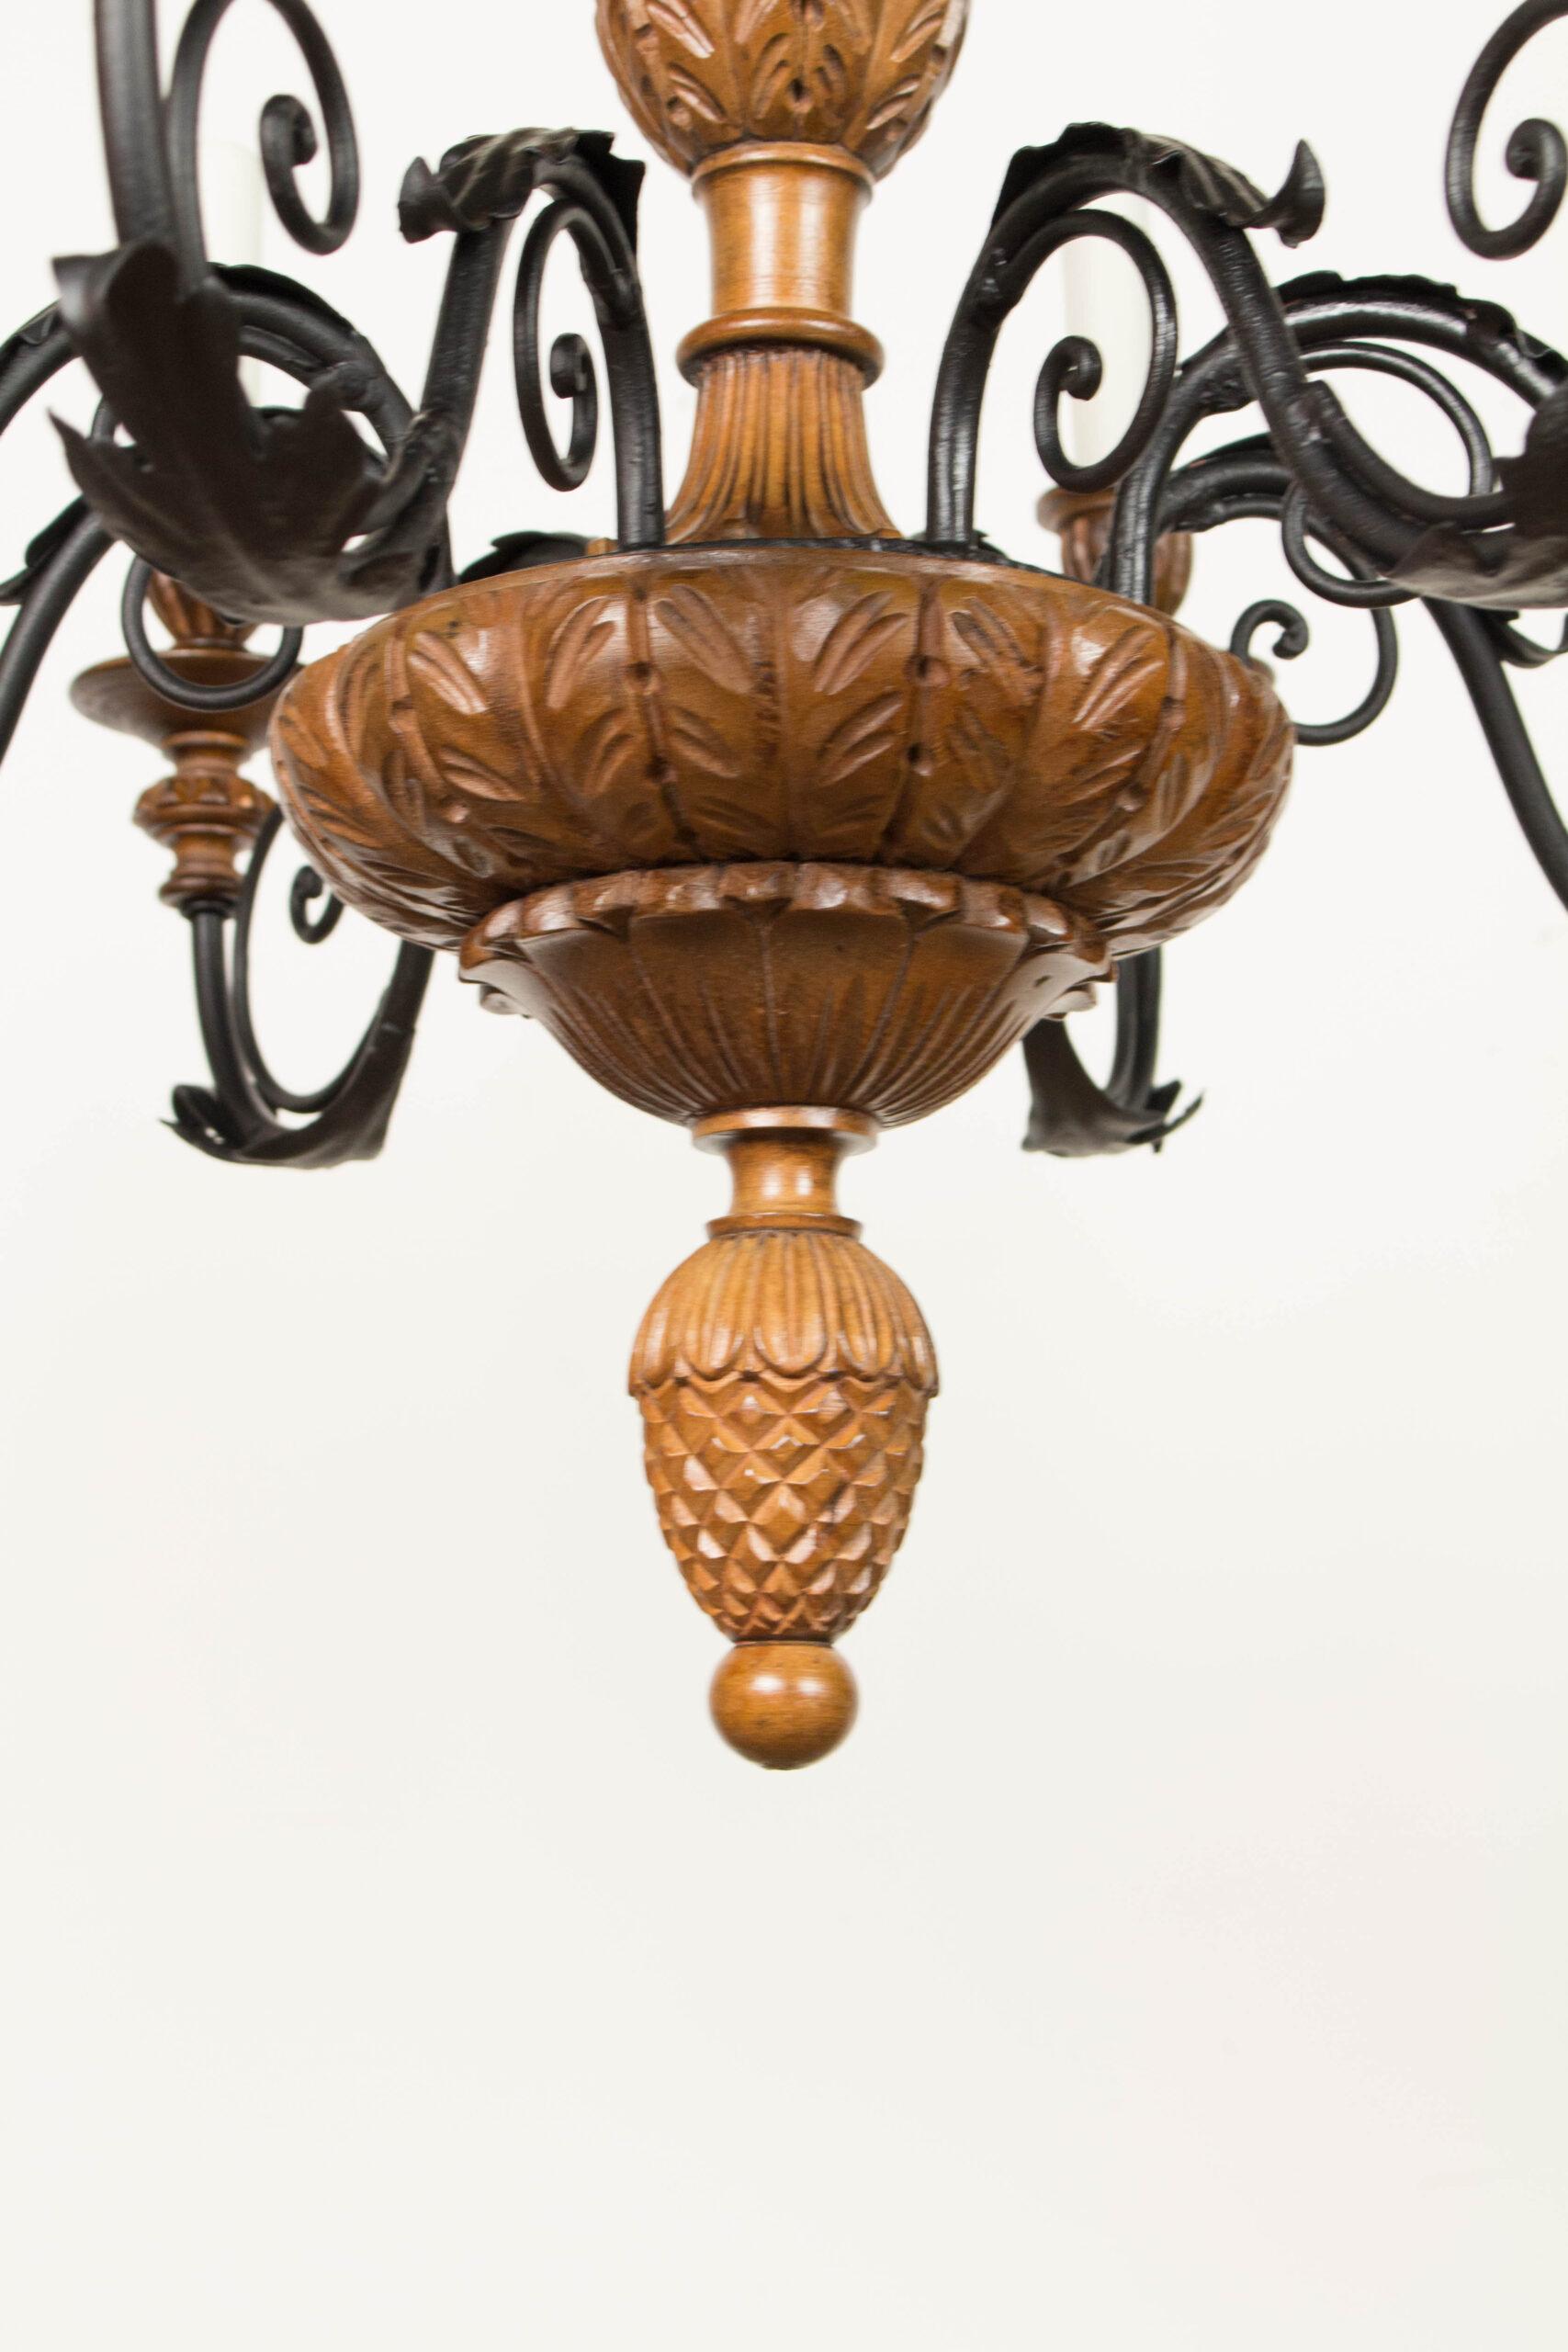 Neoclassical Revival C384 Early 20th Century Italian Carved Wood and Metal Chandelier For Sale